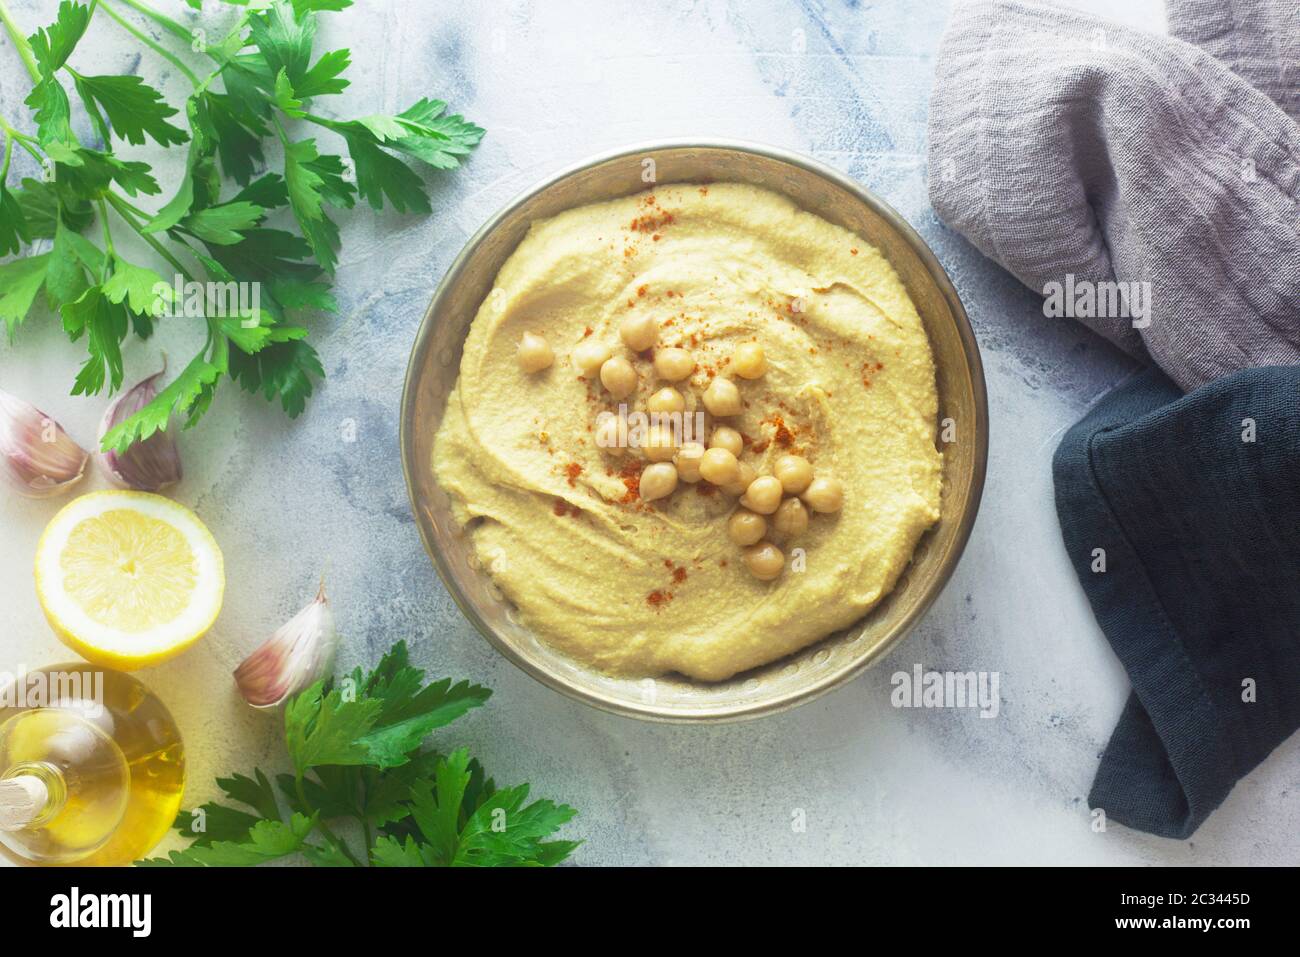 Hummus With Ingredients On A Stone Background Stock Photo